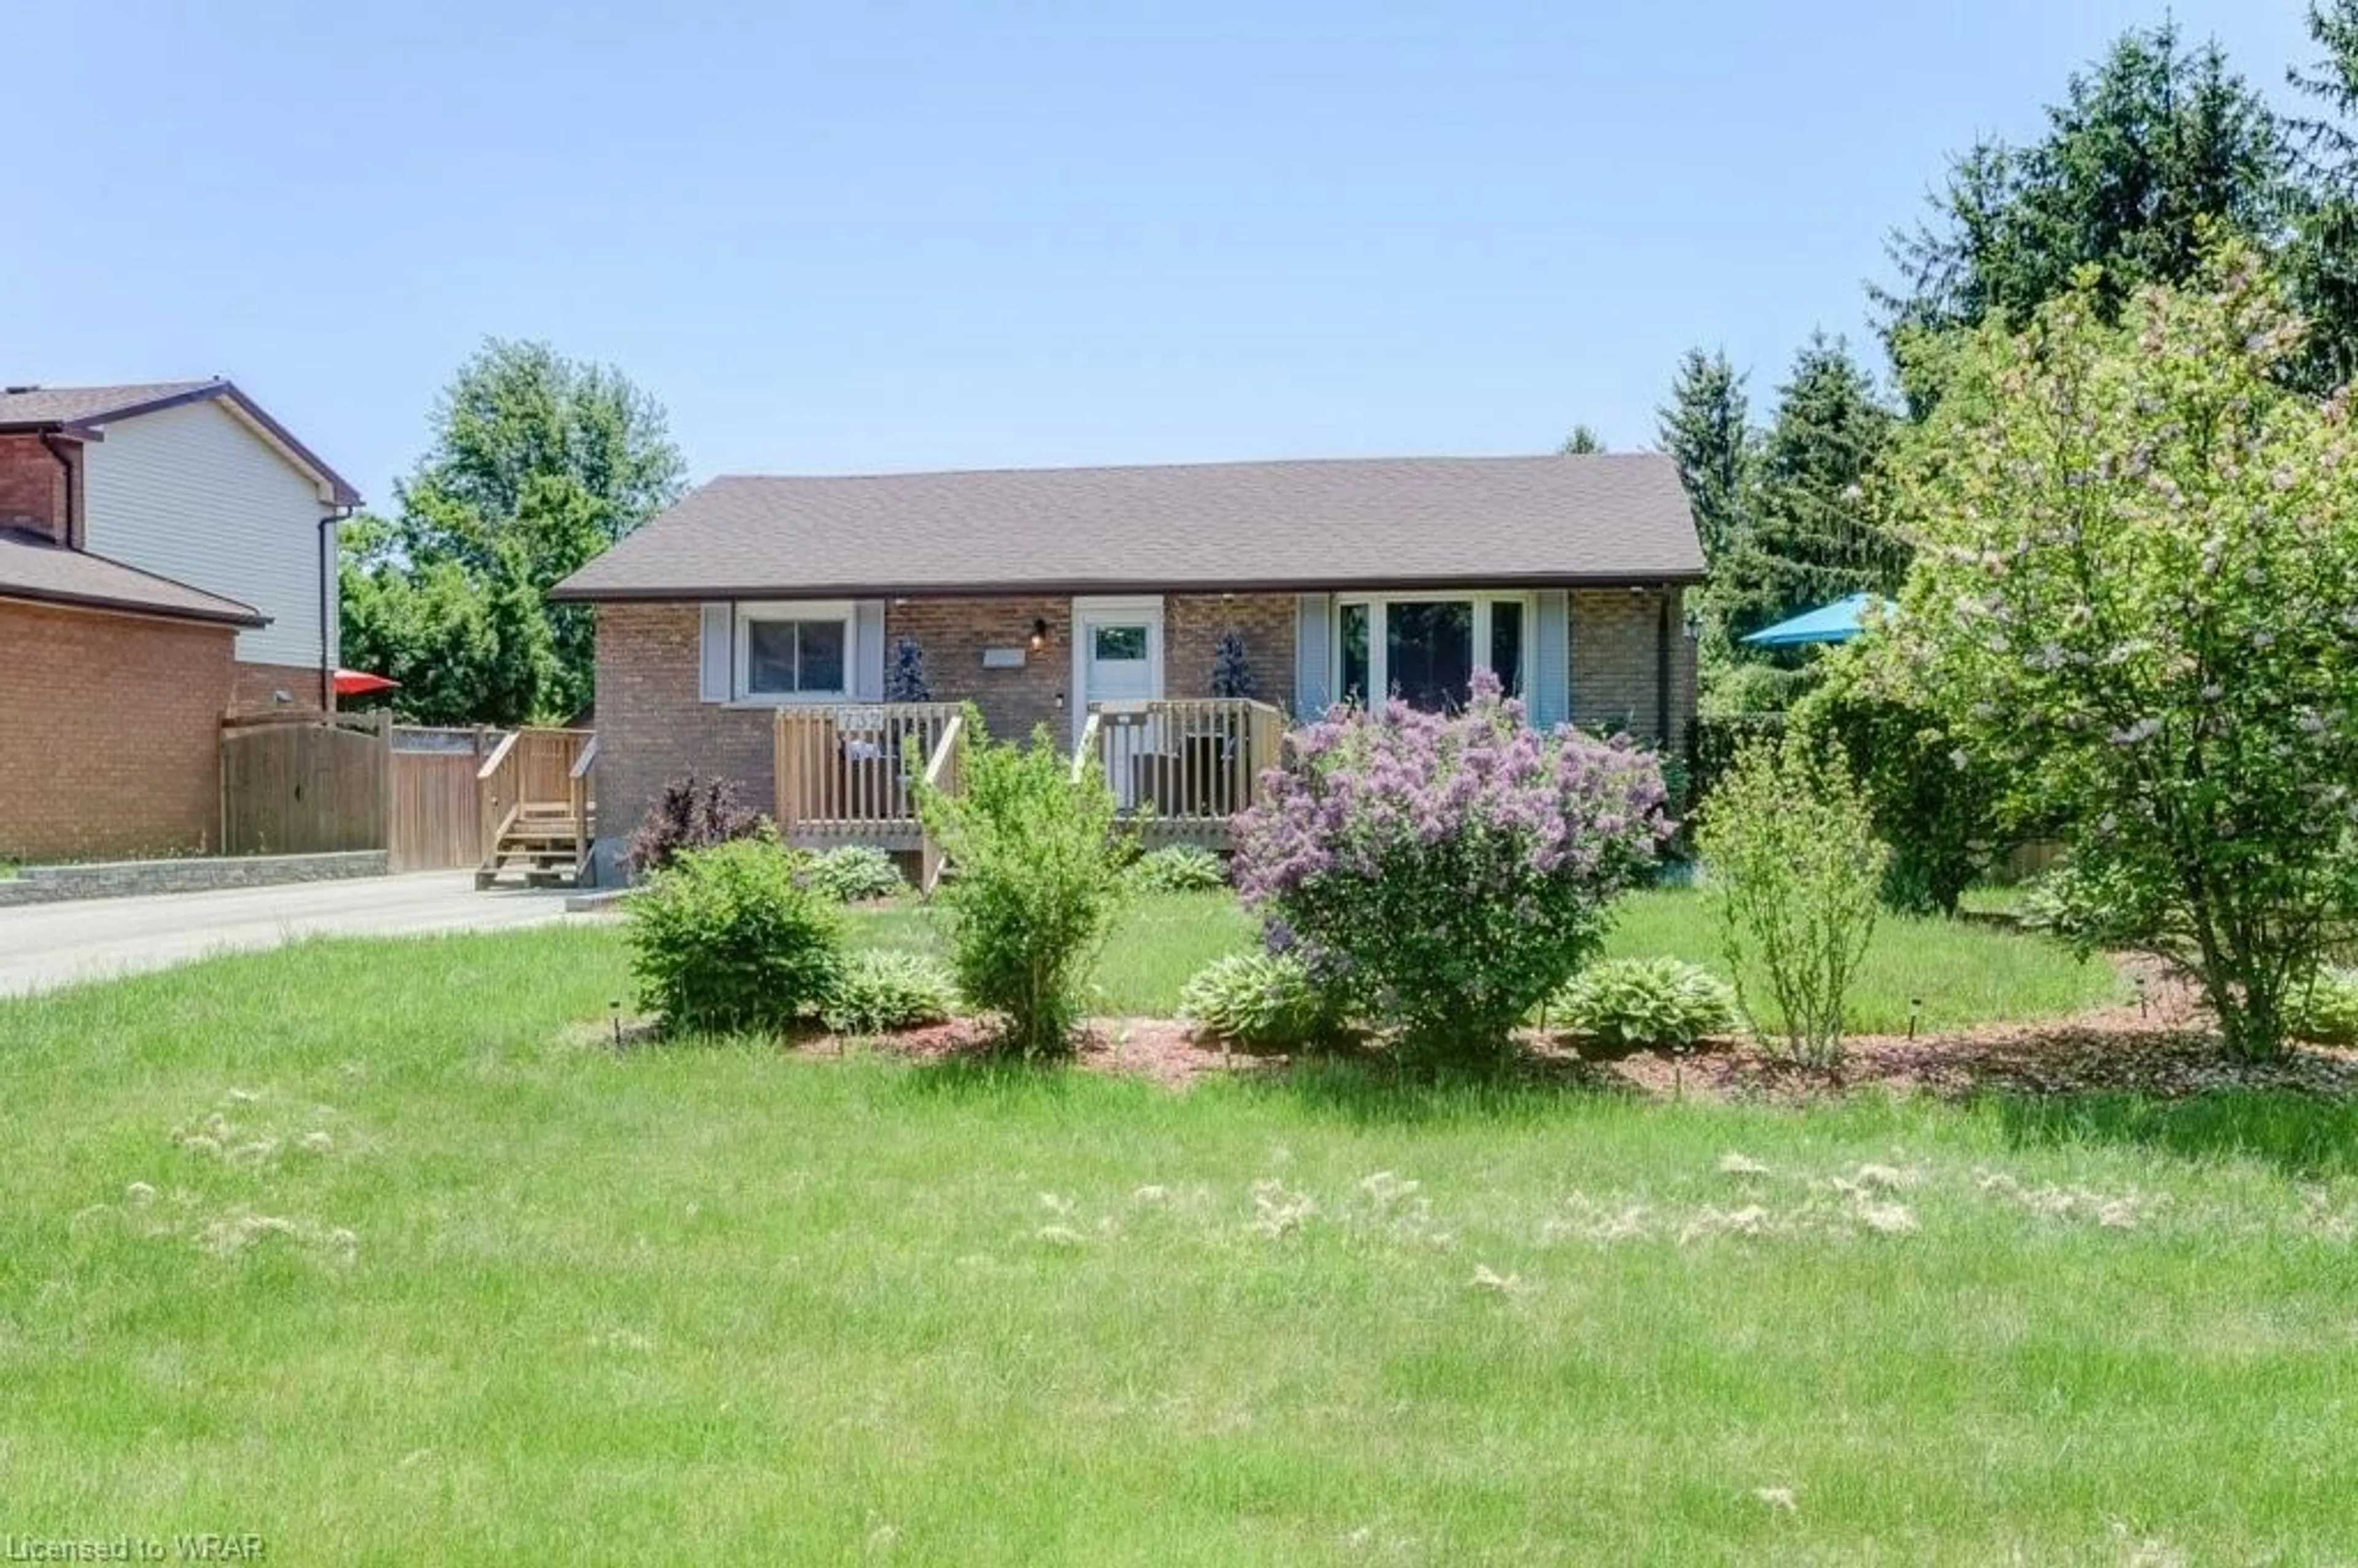 Cottage for 732 Salter Ave, Woodstock Ontario N4S 2P5